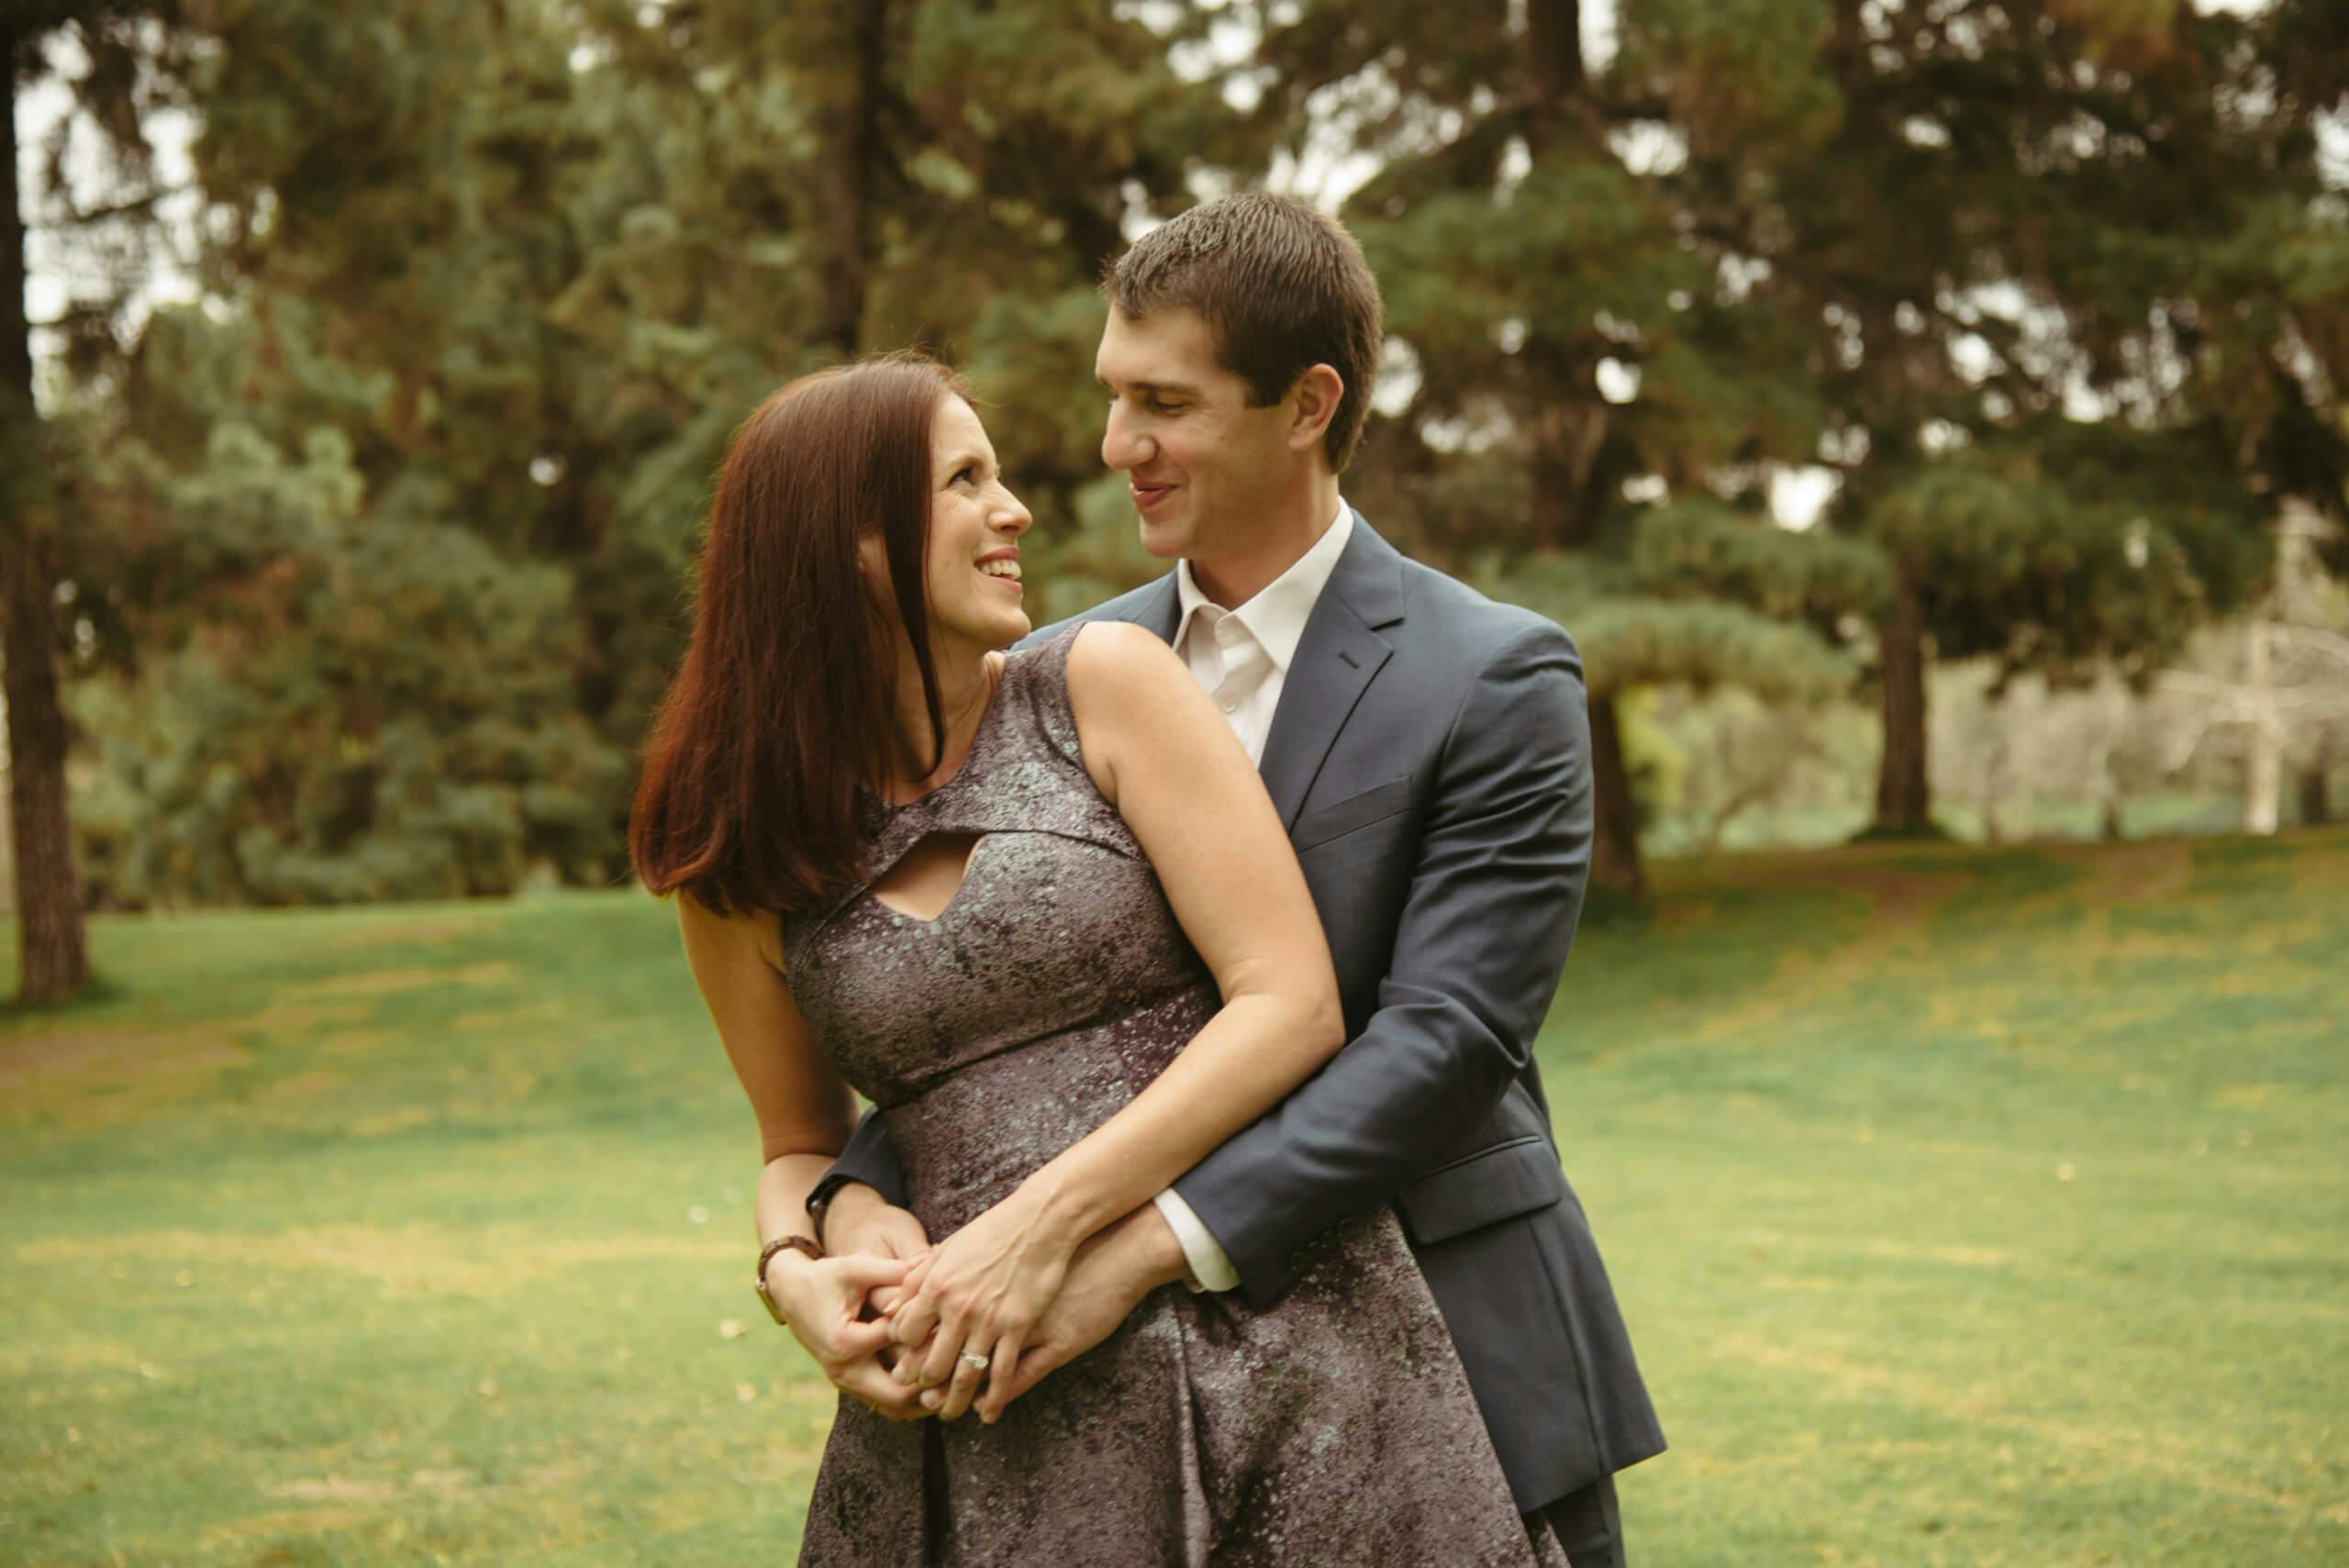 A smiling couple embracing in a park with trees in the background